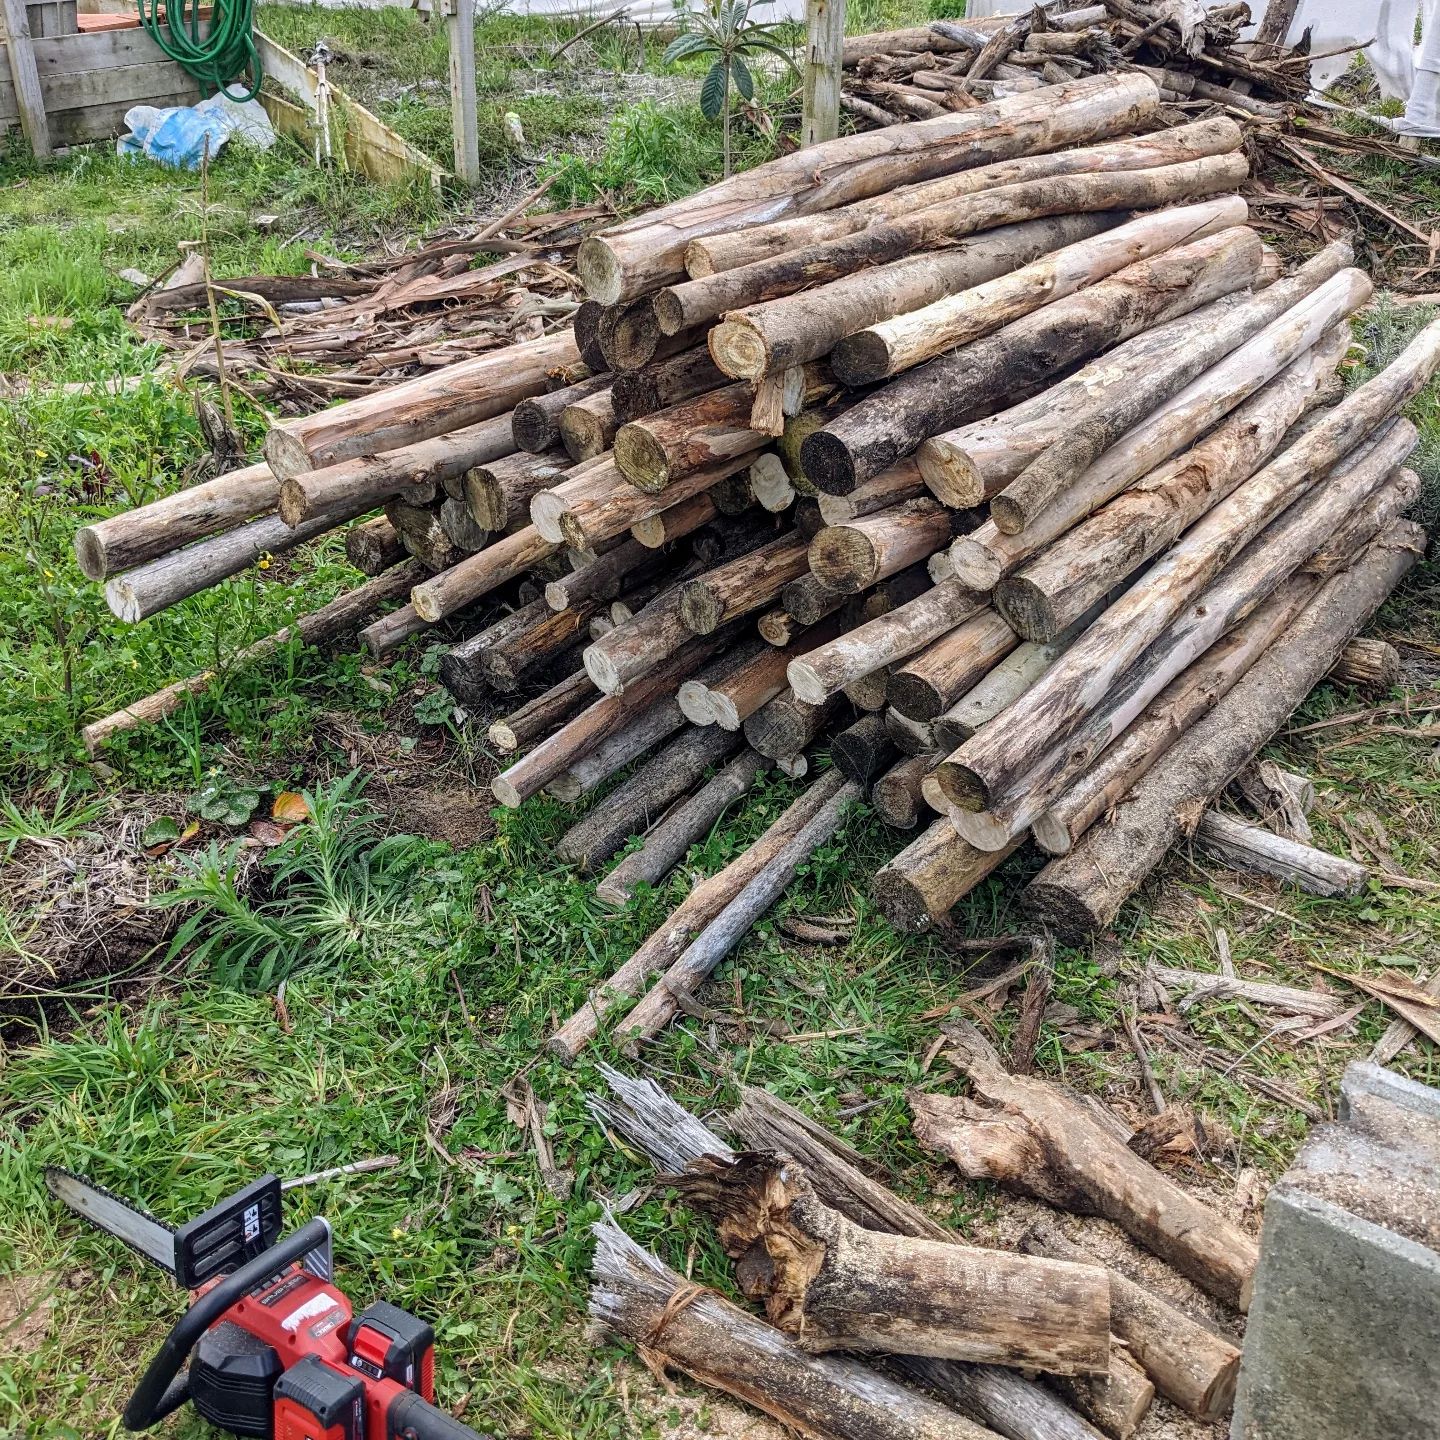 Sorted through a big pile of #eucalyptus logs lying around since before the earthworks last year